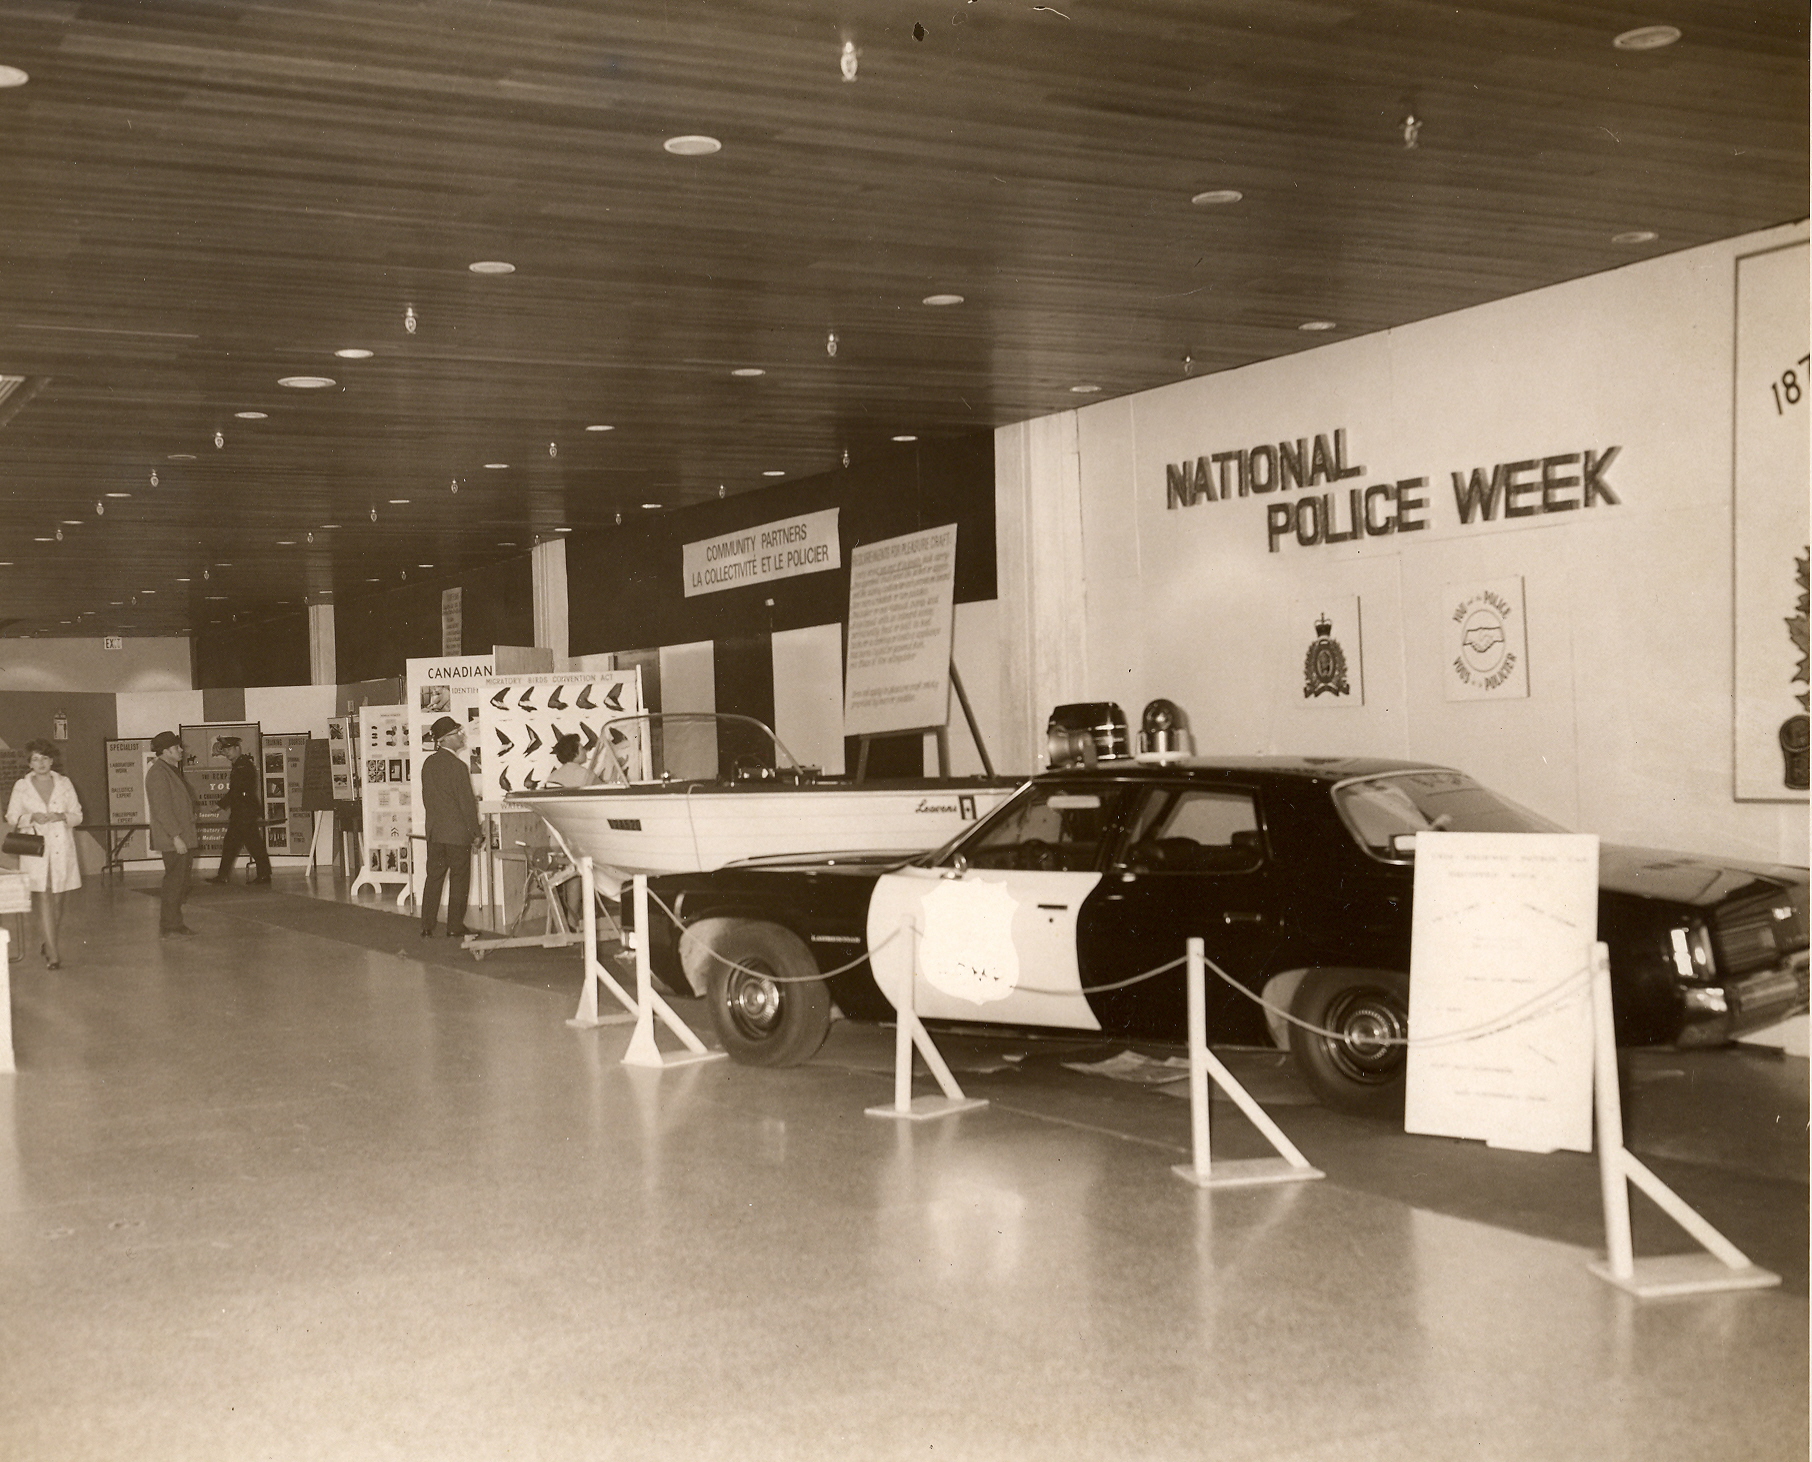 Black and white photo of a cruiser on display under a National Police Week banner